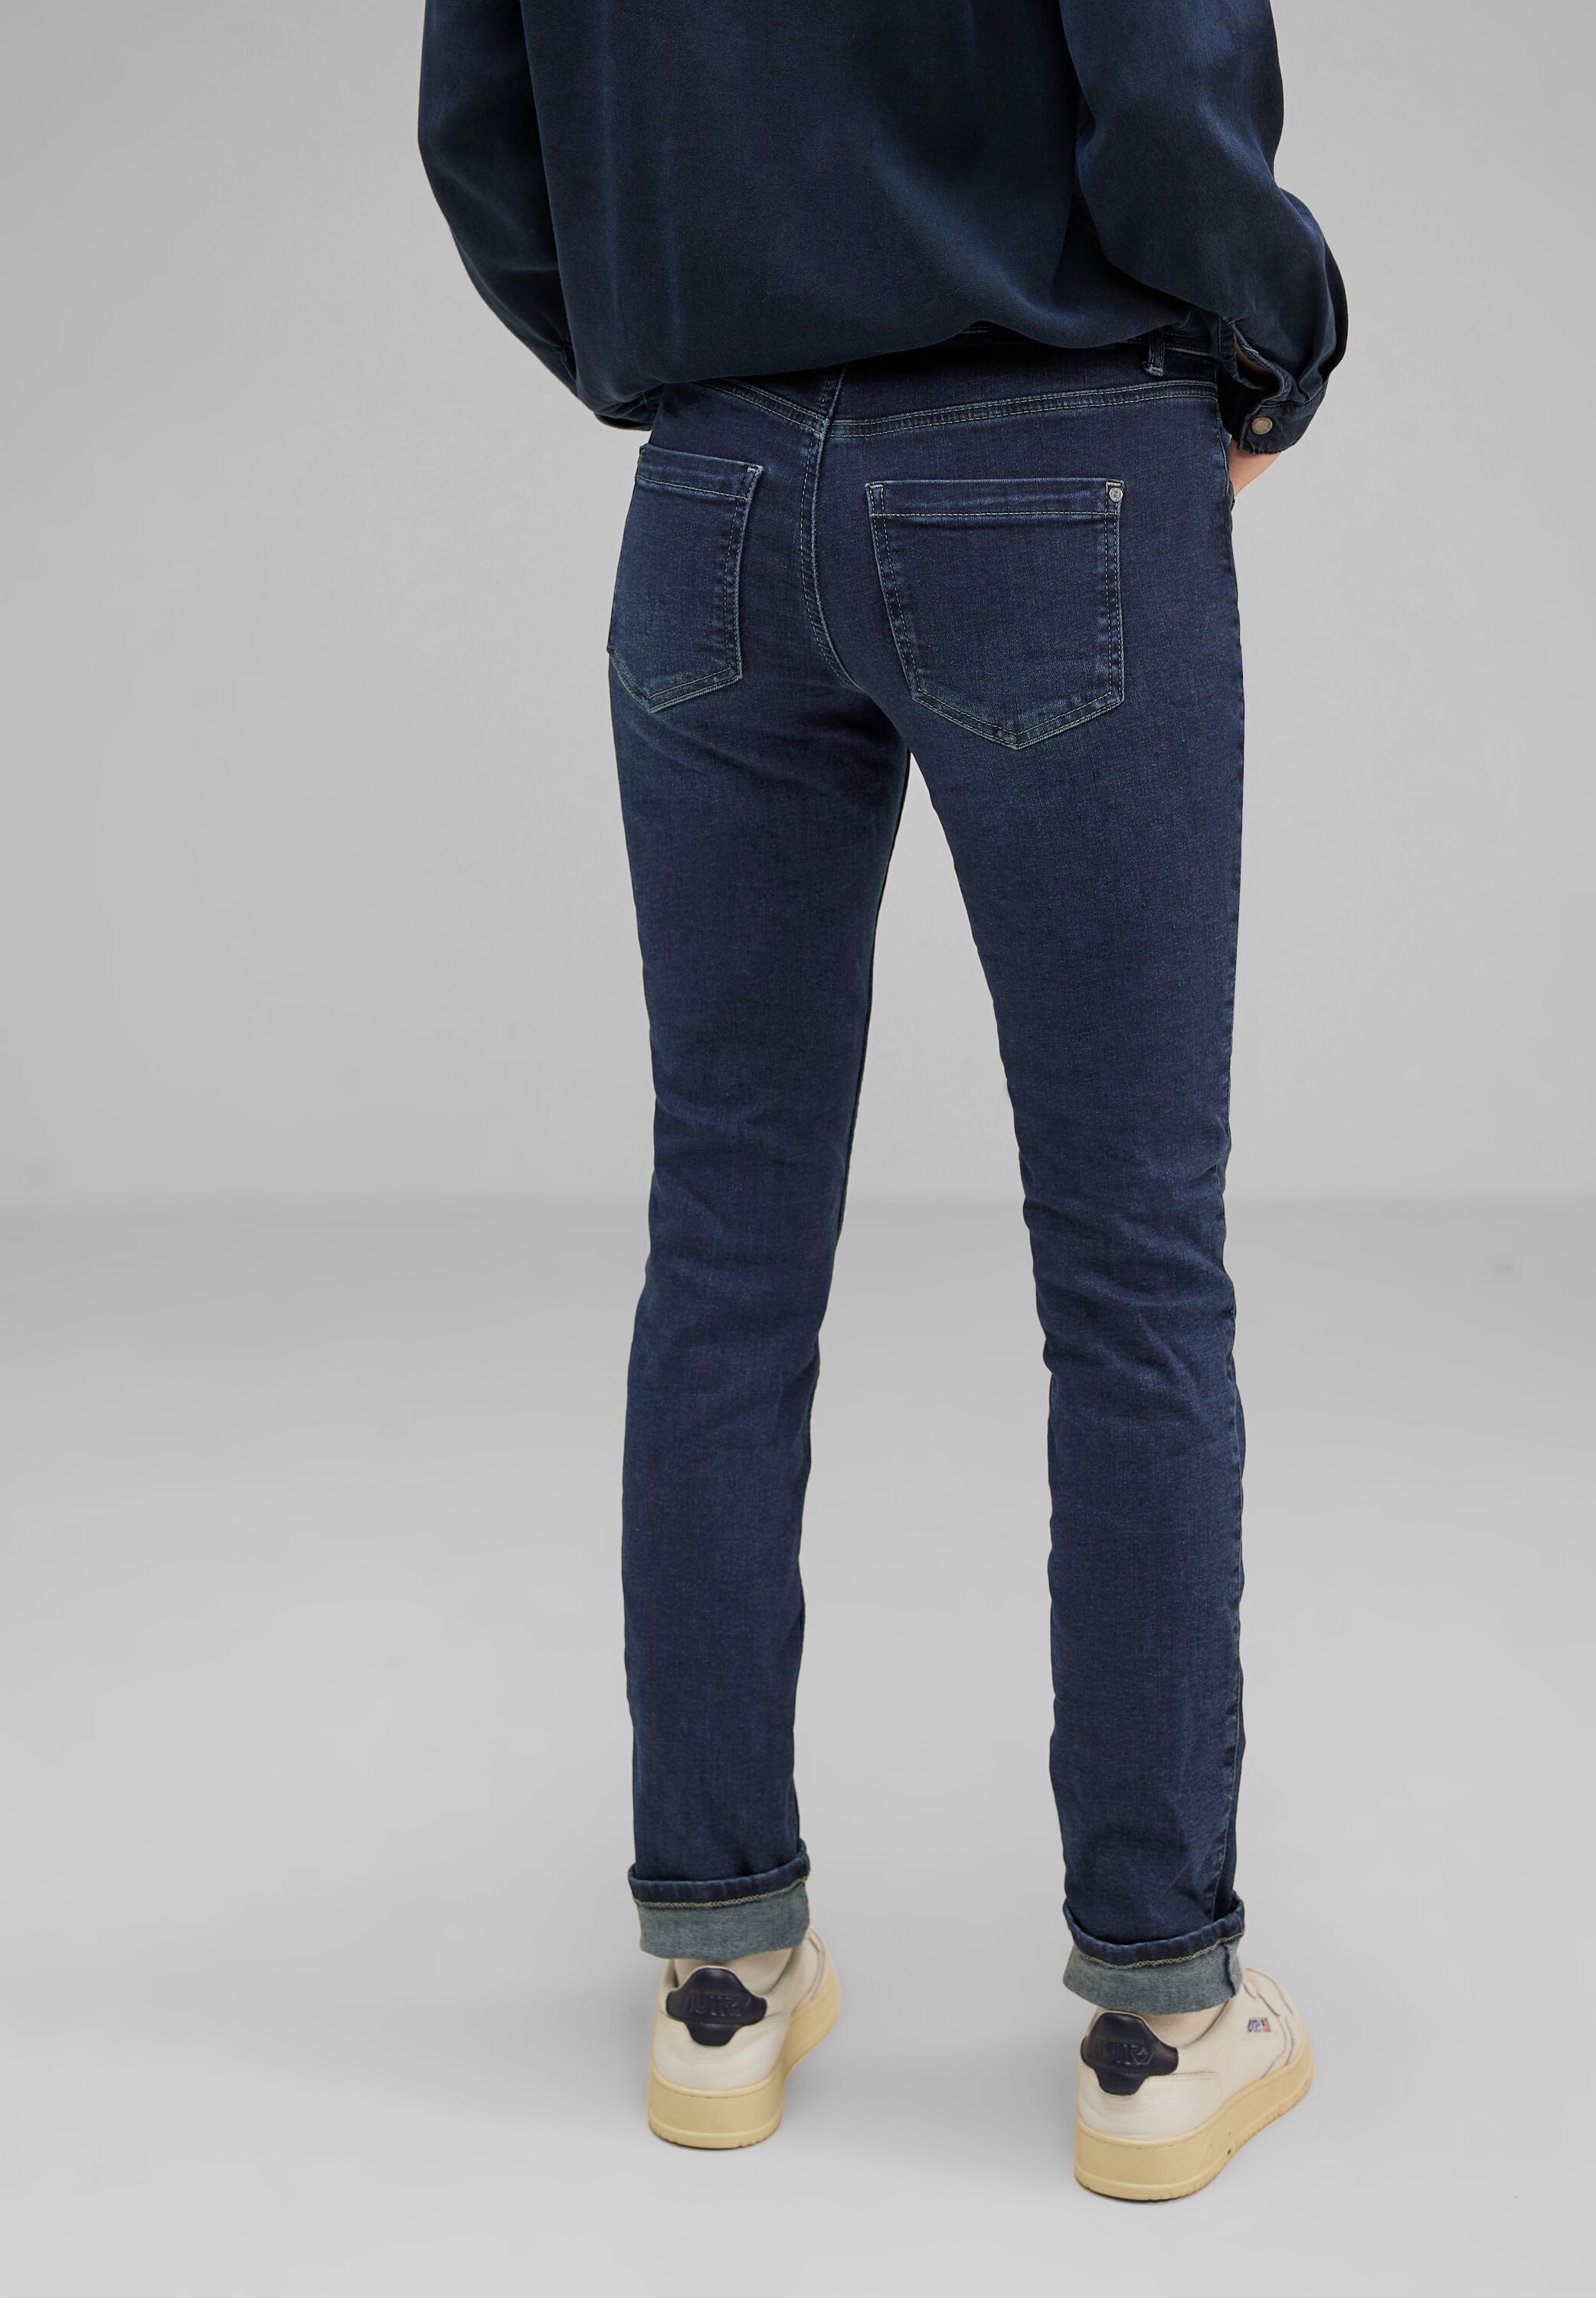 ONE BAUR | Thermo-Effekt Jane«, Wärmender Fit Thermojeans STREET kaufen »Casual Style Thermojeans